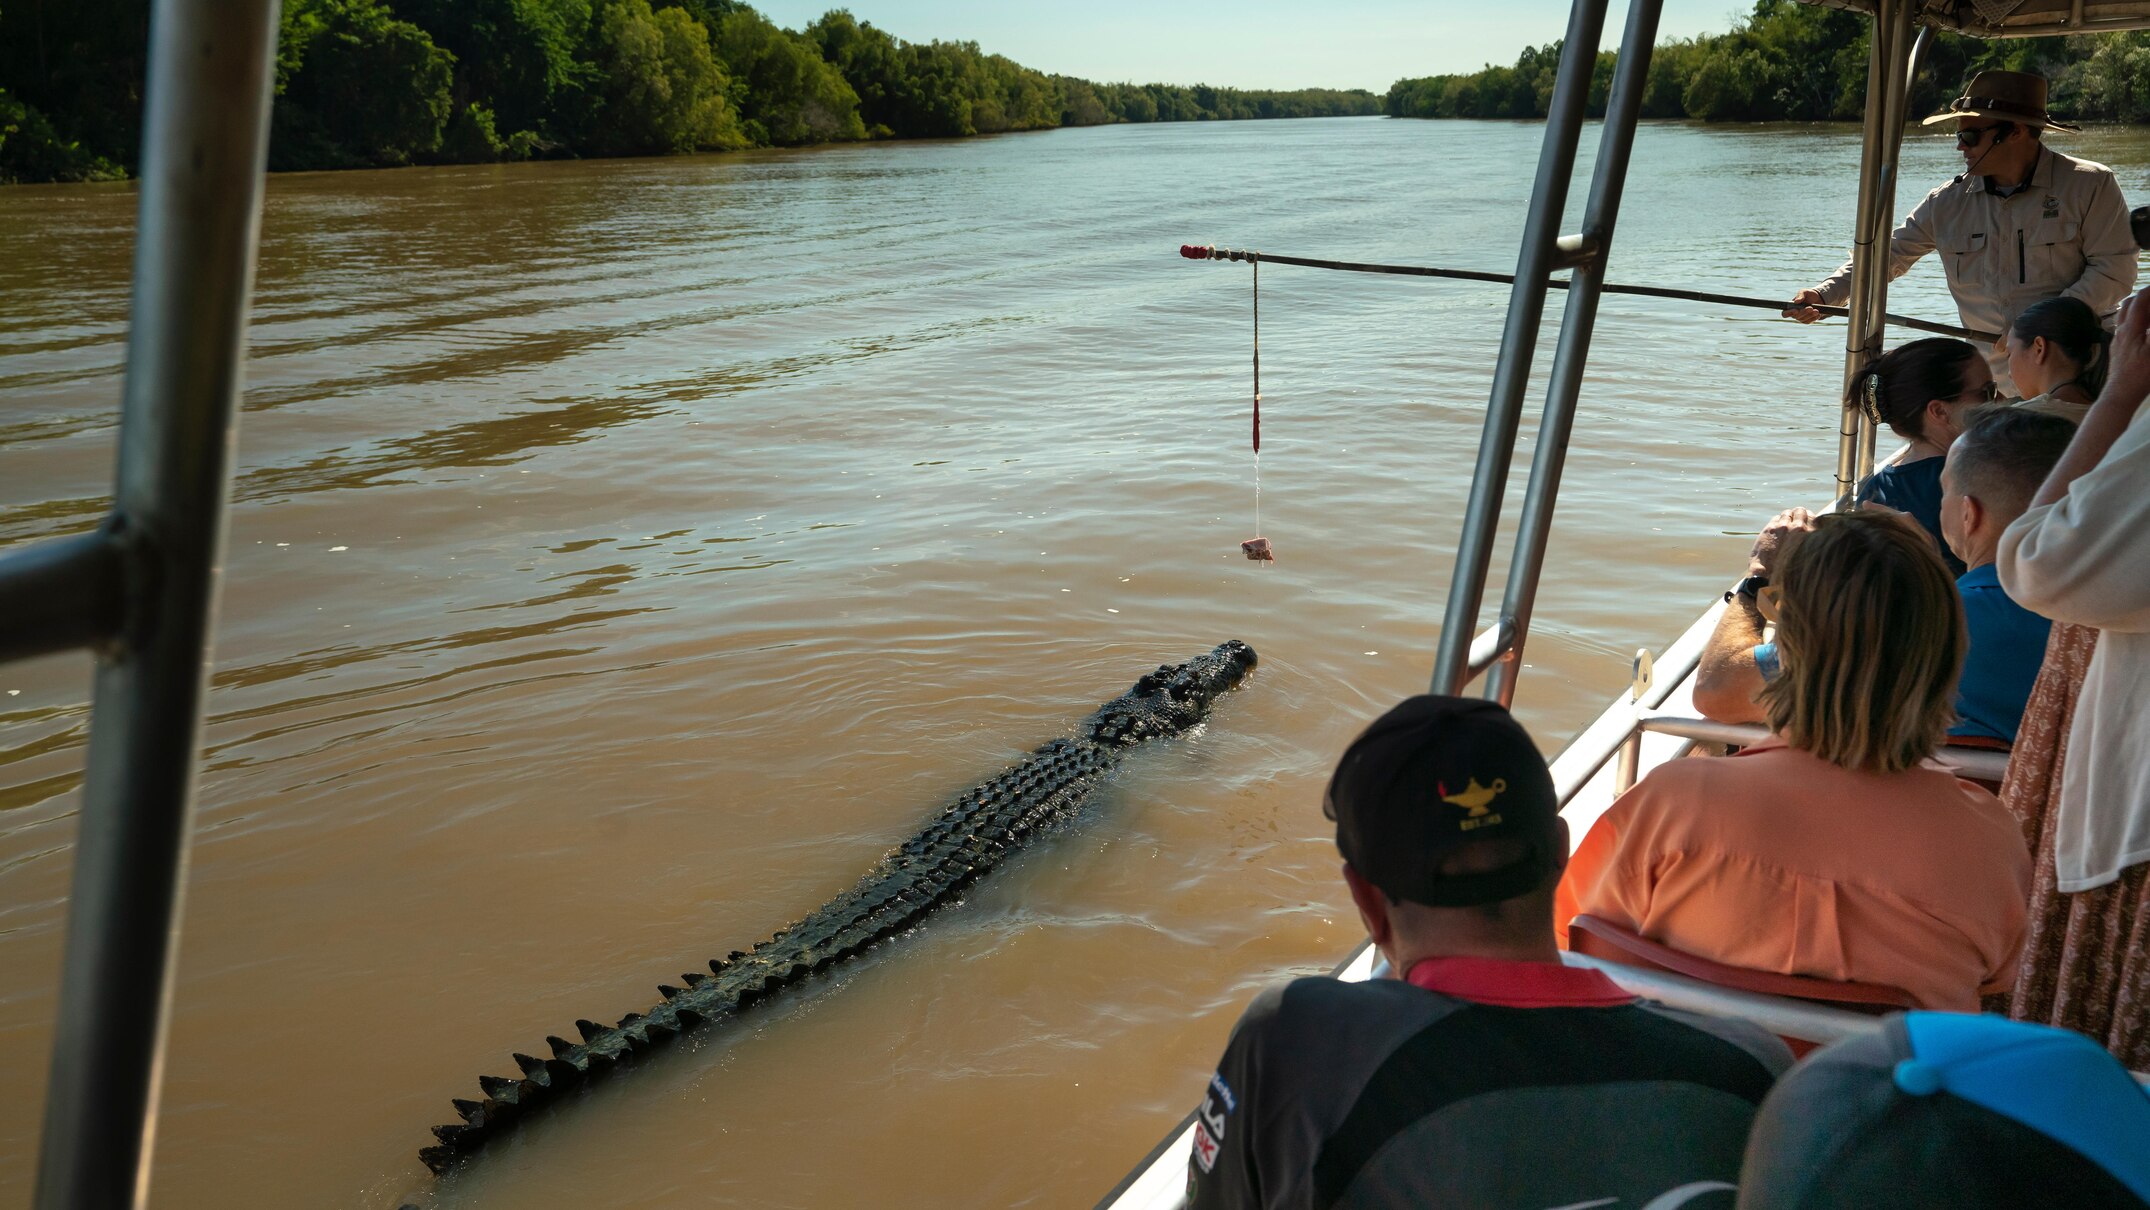 nt government unveils new saltwater crocodile management plan, stops short of mass culls